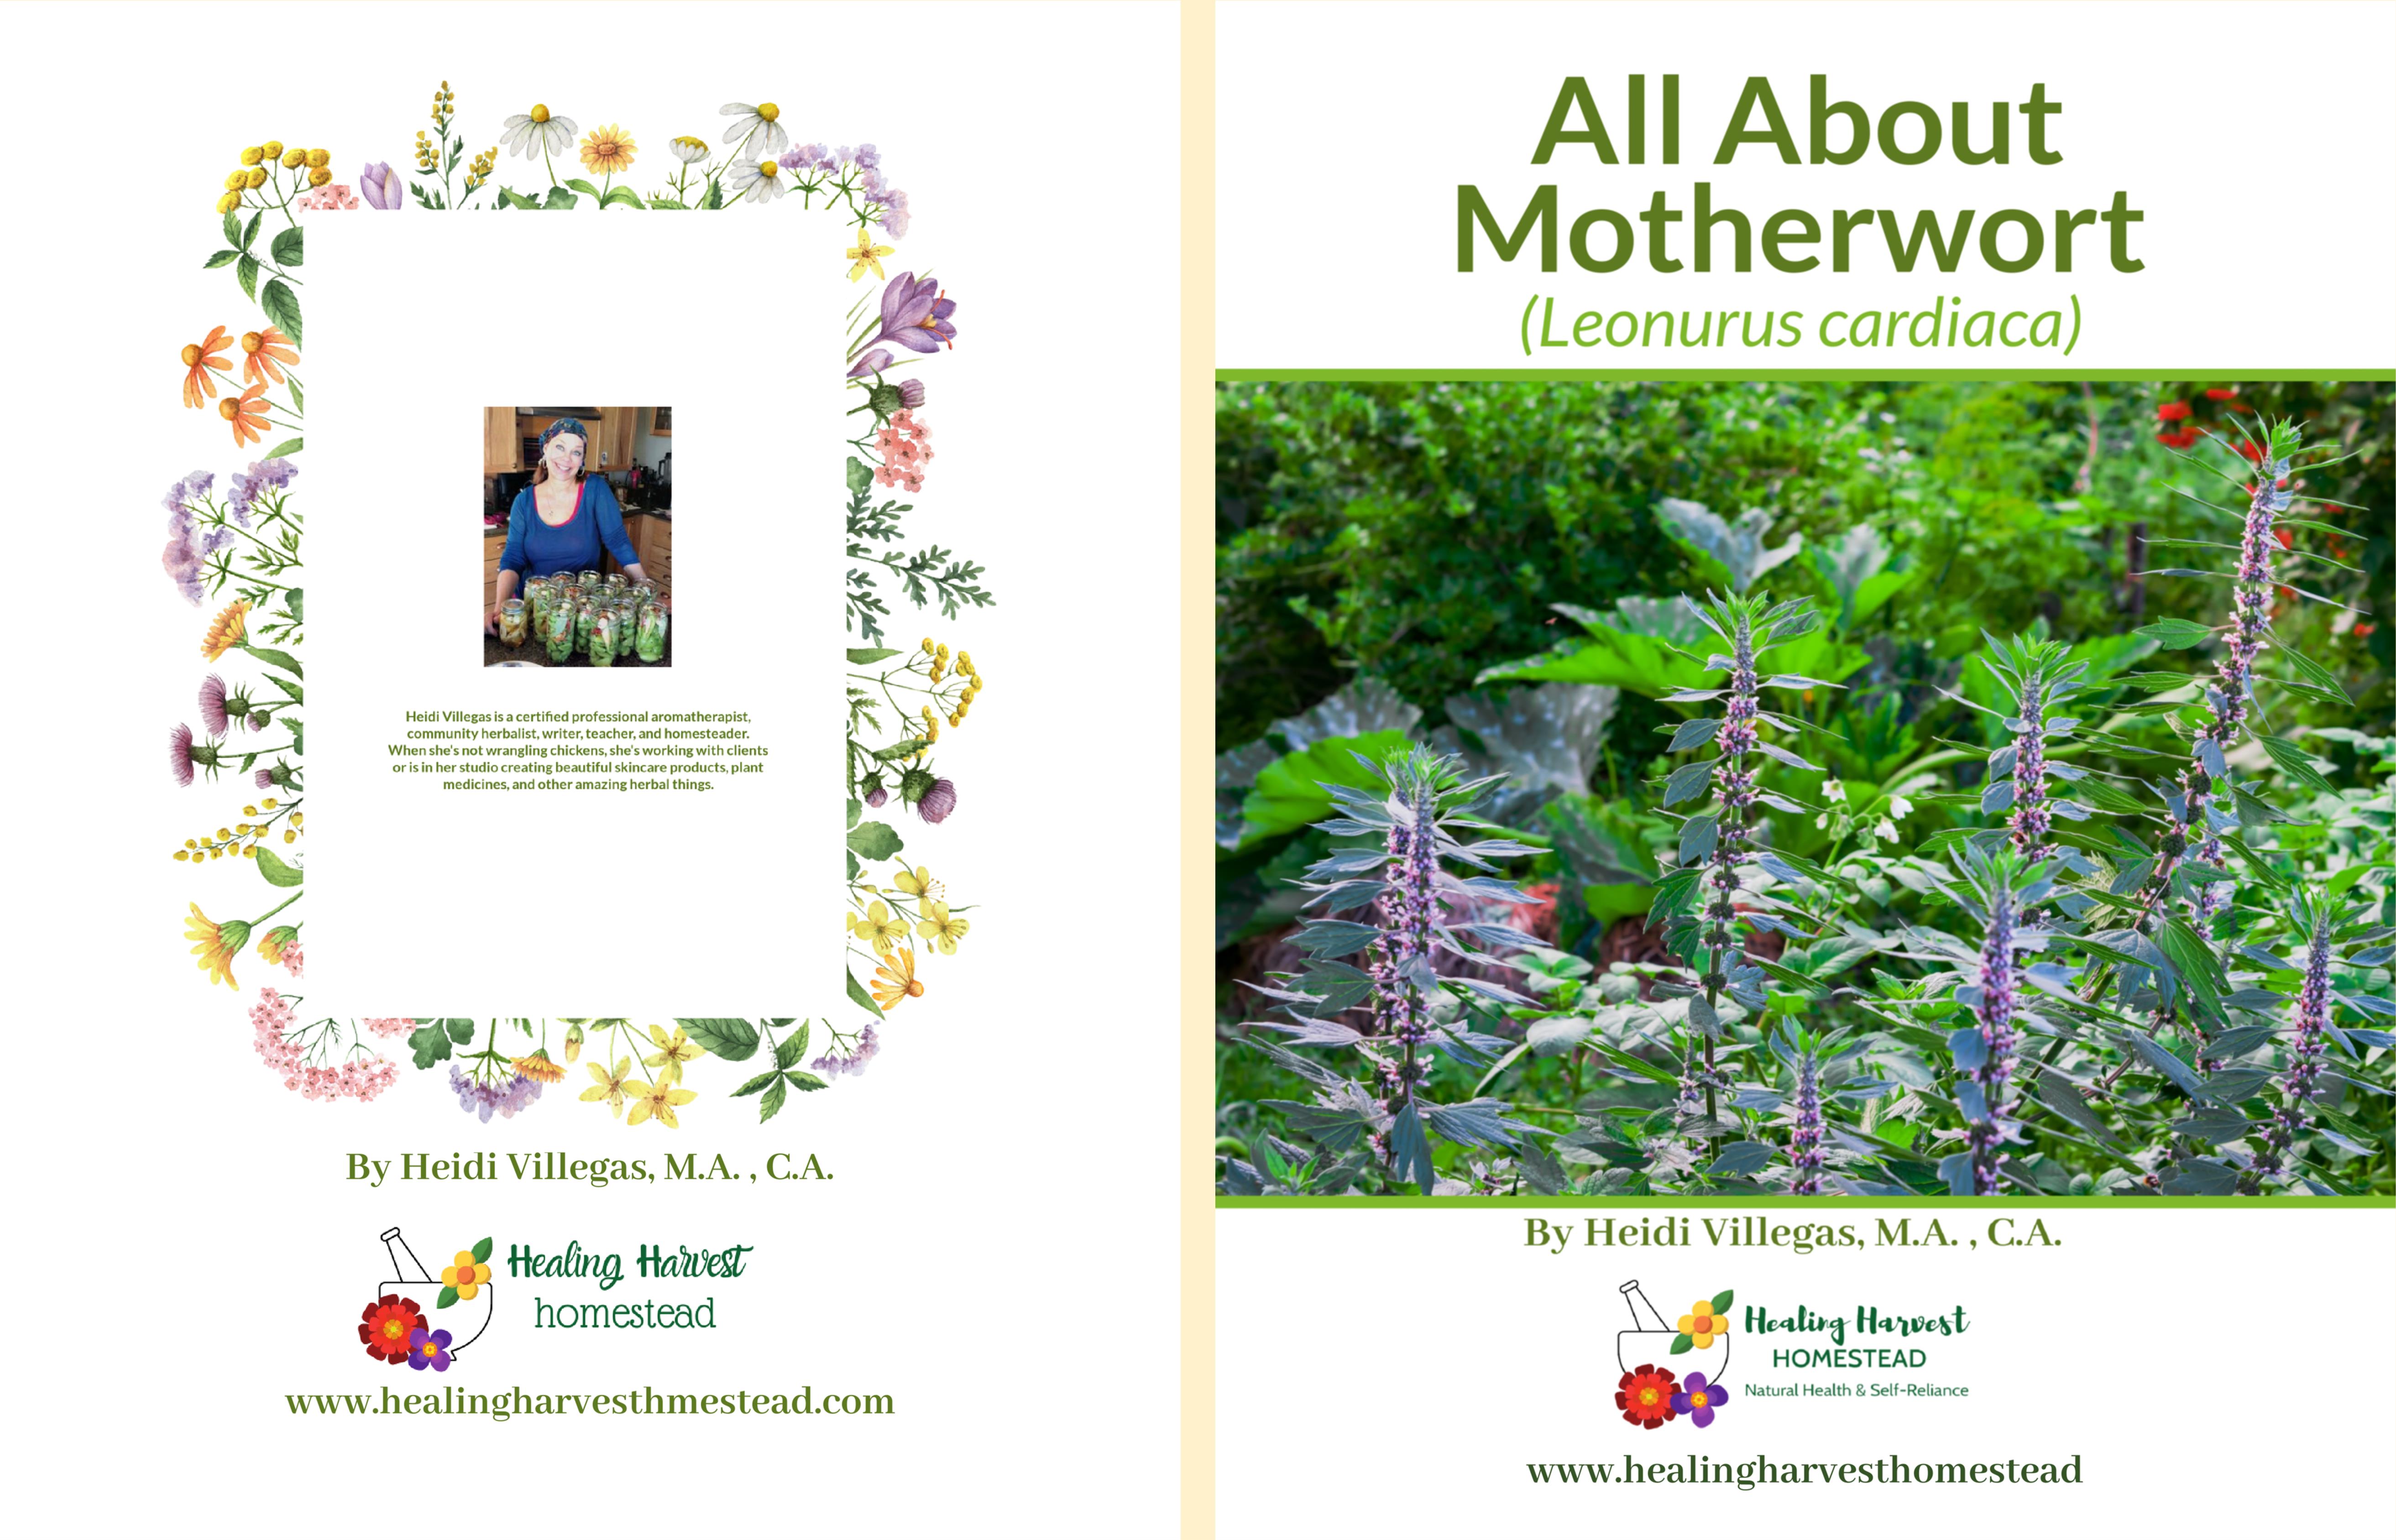 All About Motherwort cover image